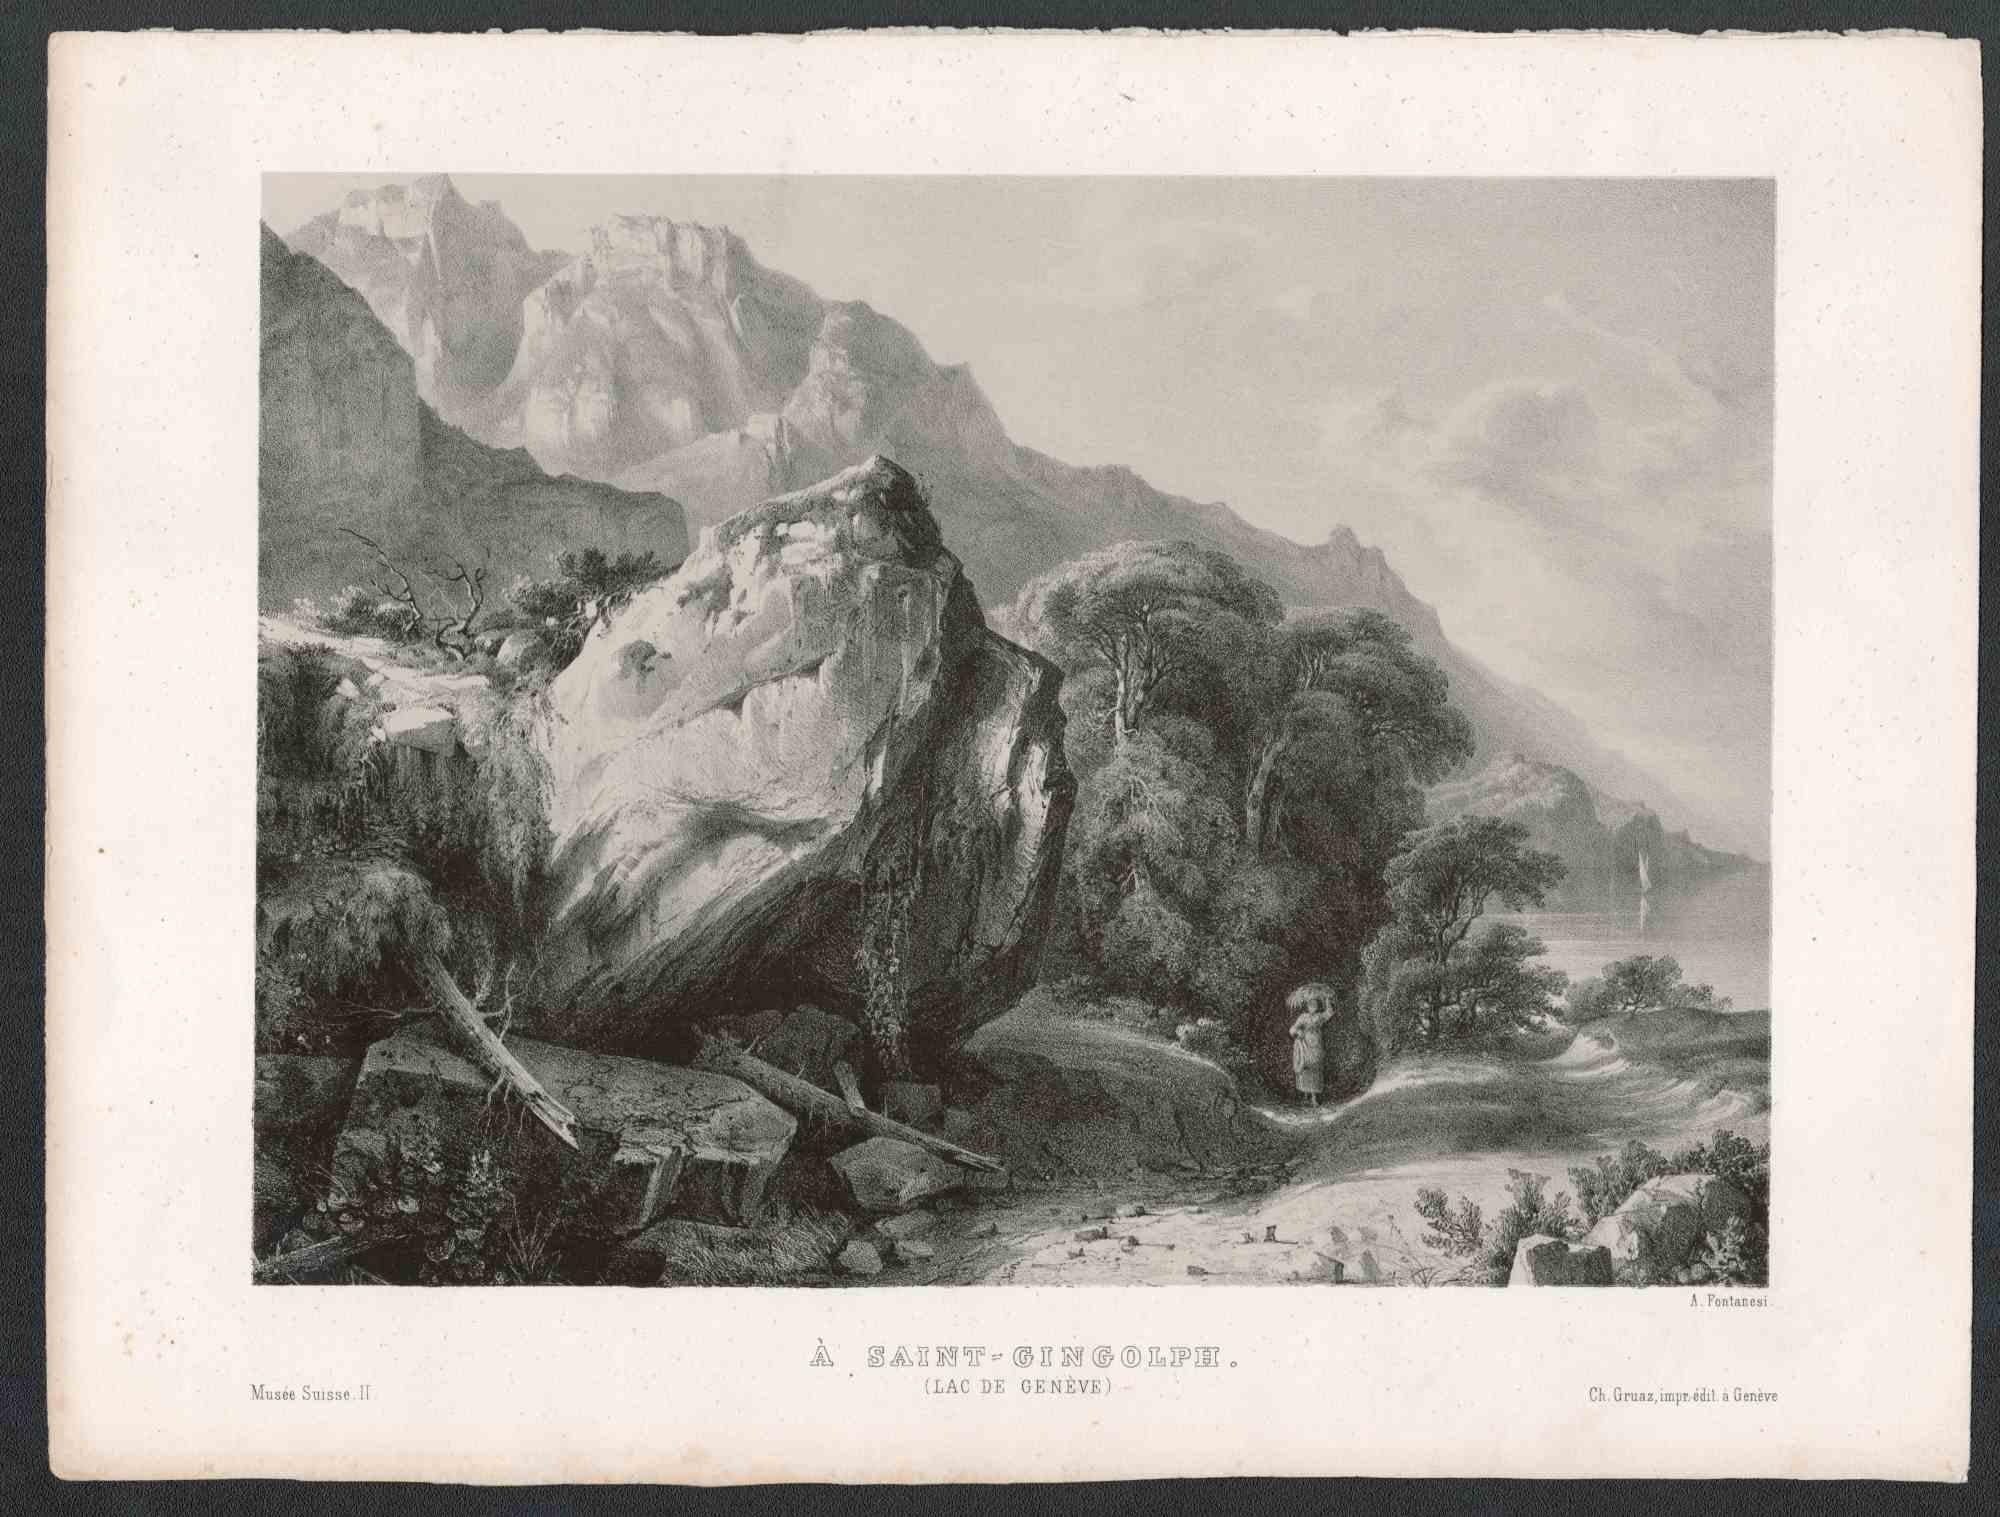 Embouchures de Rhone' and 'A Saint Gingolph' are original Lithografs realized by Charles Gruaz in the 19th Century.

Printed in Geneva by Charles Gruaz, for the edition of Musée Suisse.

Print is applied on the coeval card with the title and the